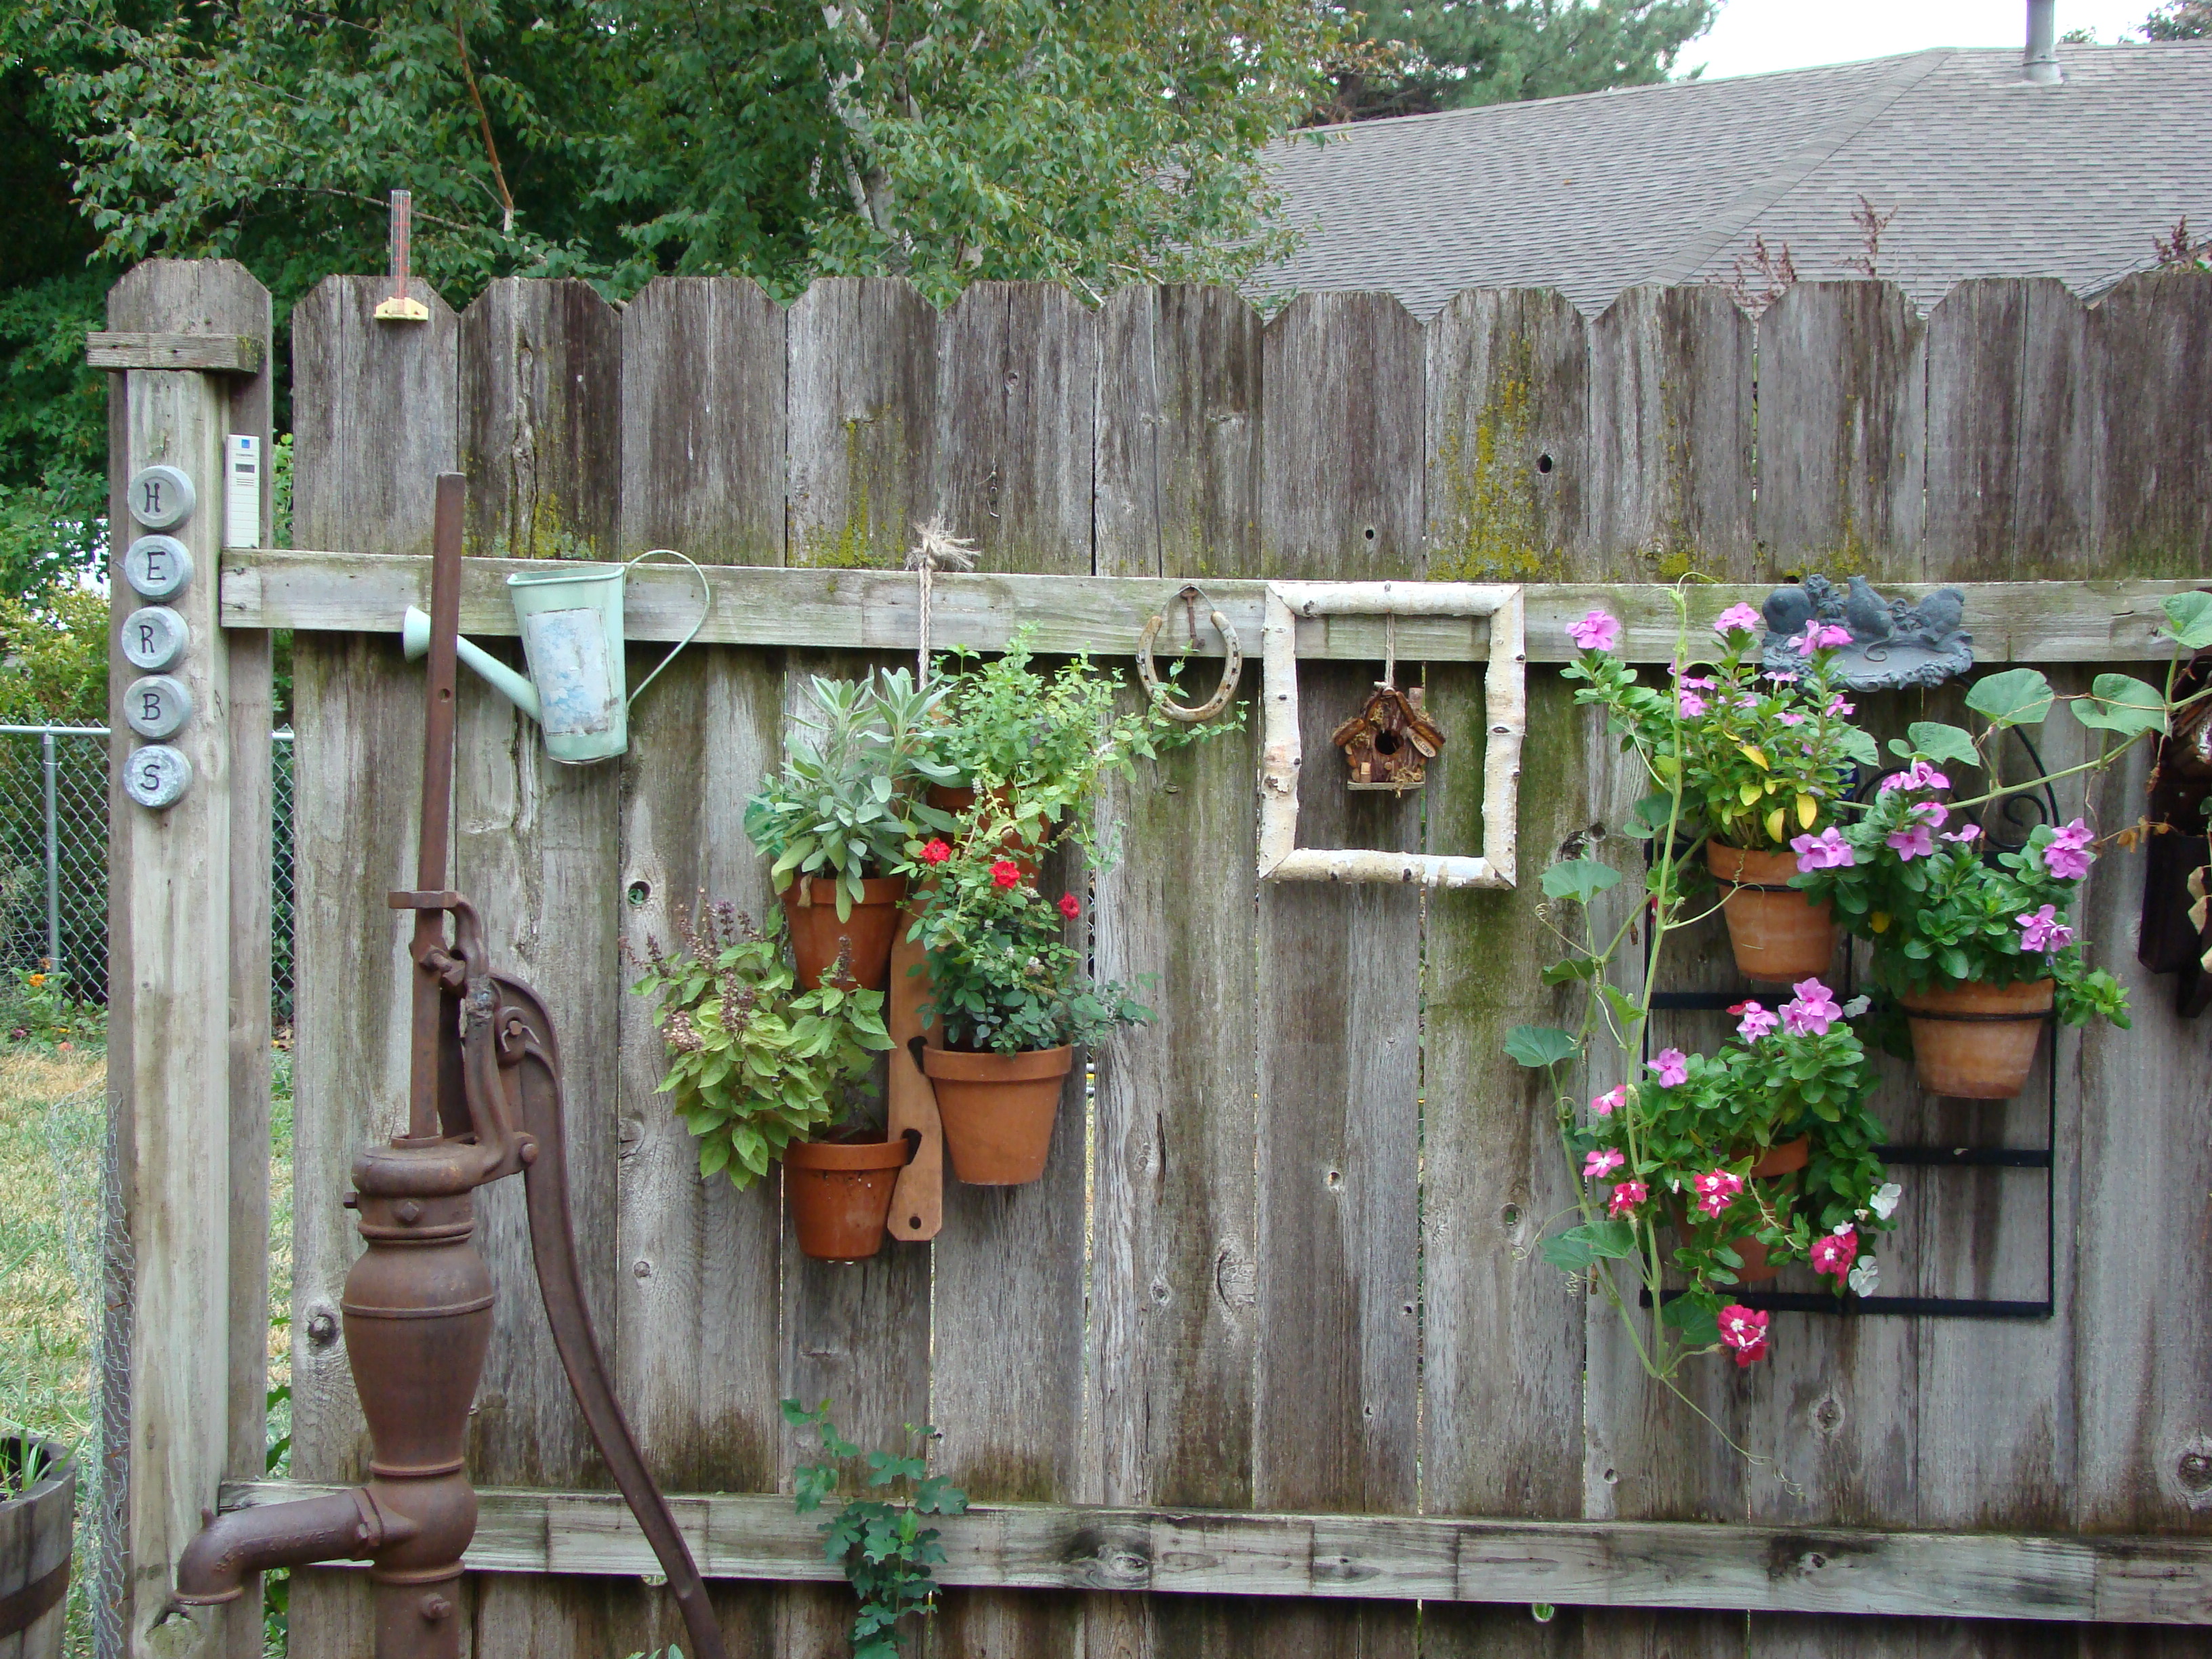 Garden Fence Decor Ideas To Bring Whimsy To The Dull Planks - Page 2 of 2